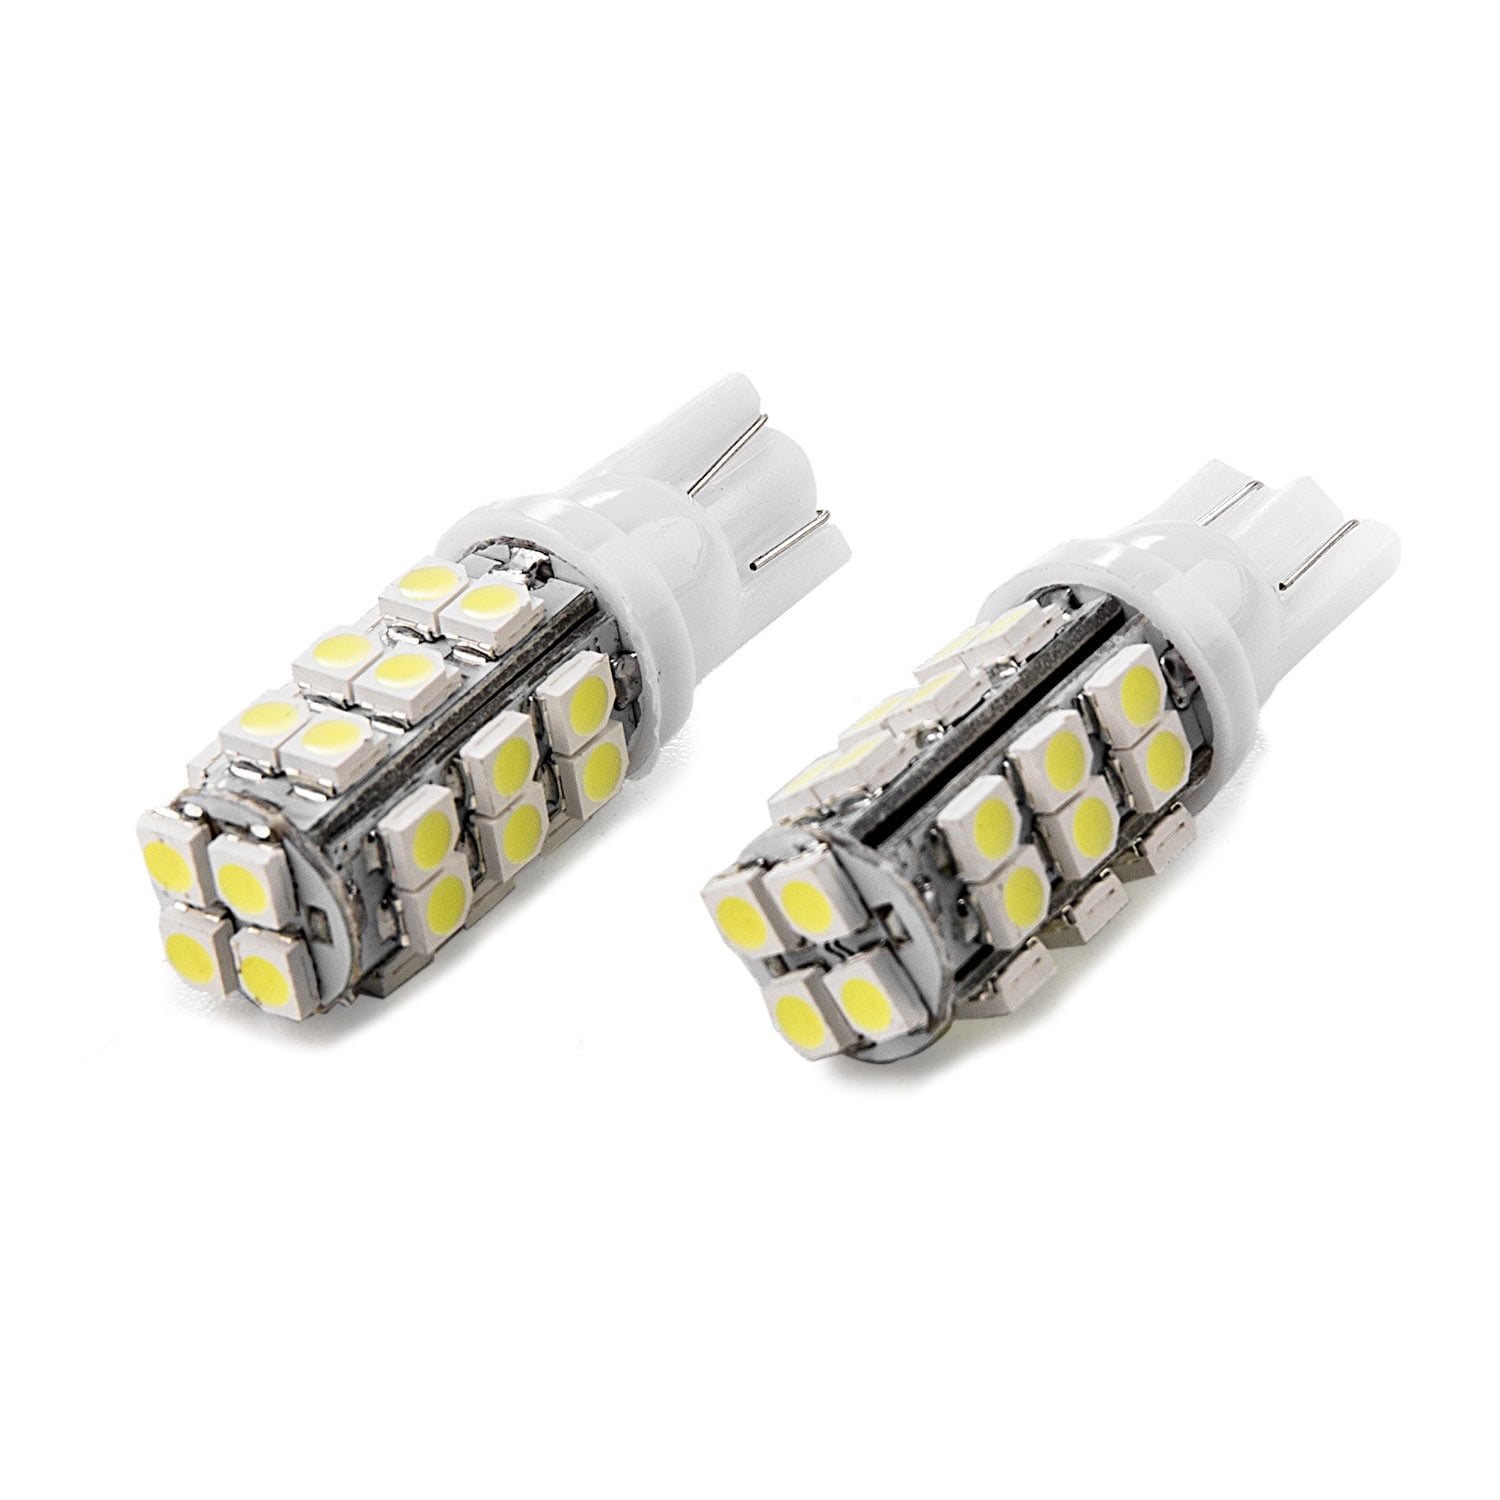 iBrightstar 9-30V Extremely Bright 3030 Chipsets 168 175 194 2825 W5W T10 Wedge LED Bulbs for Side Marker Lights,Xenon White 